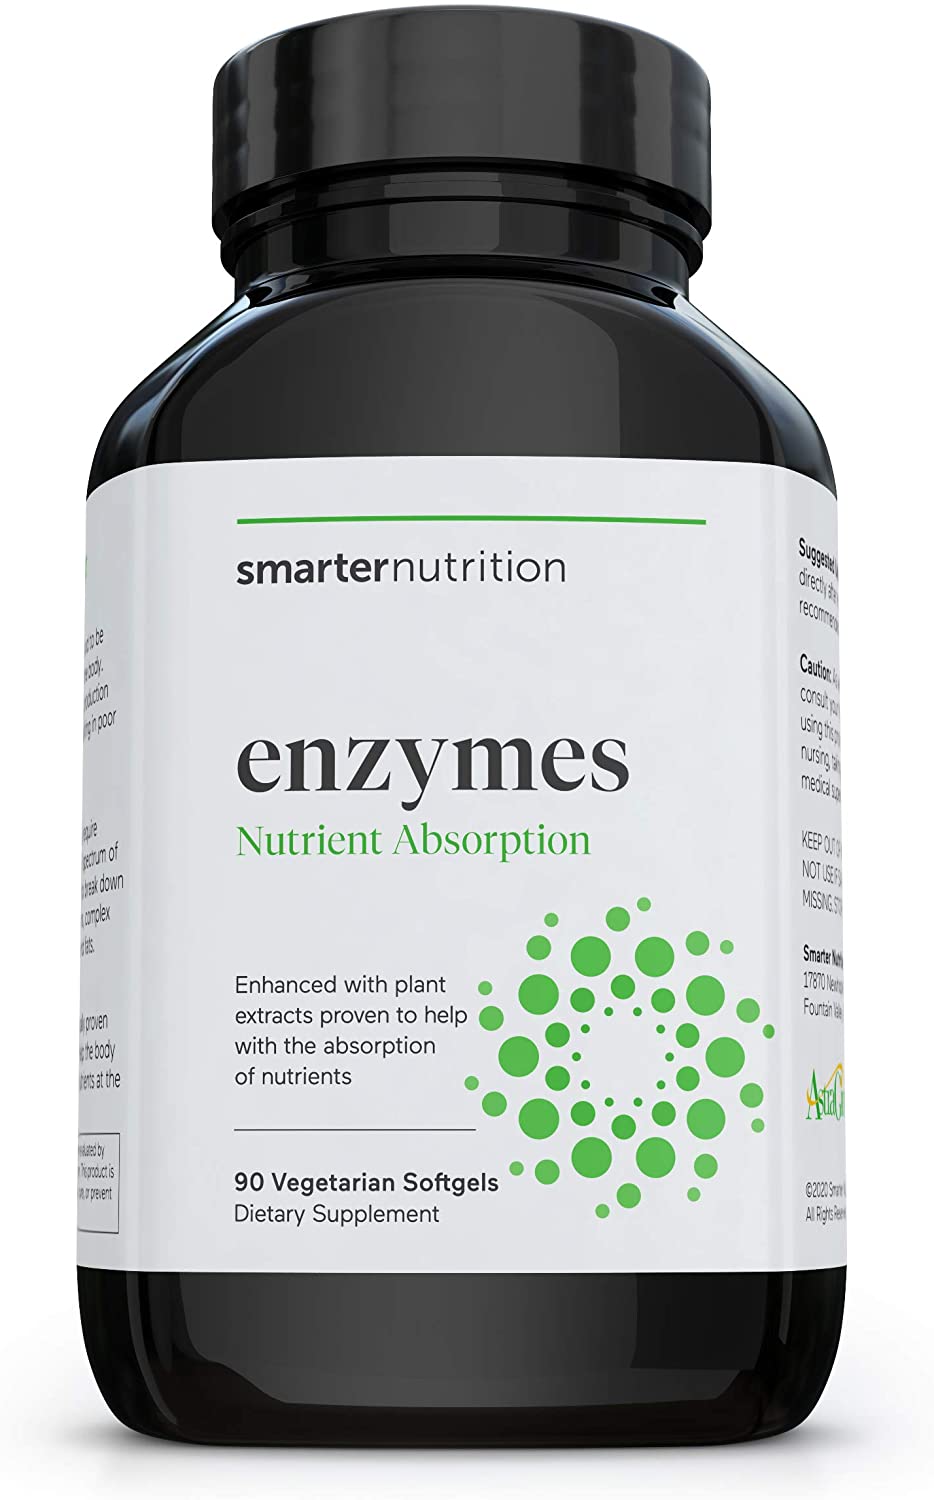 Smarter Nutrition Daily Natural Multi-Digestive Enzyme Aid